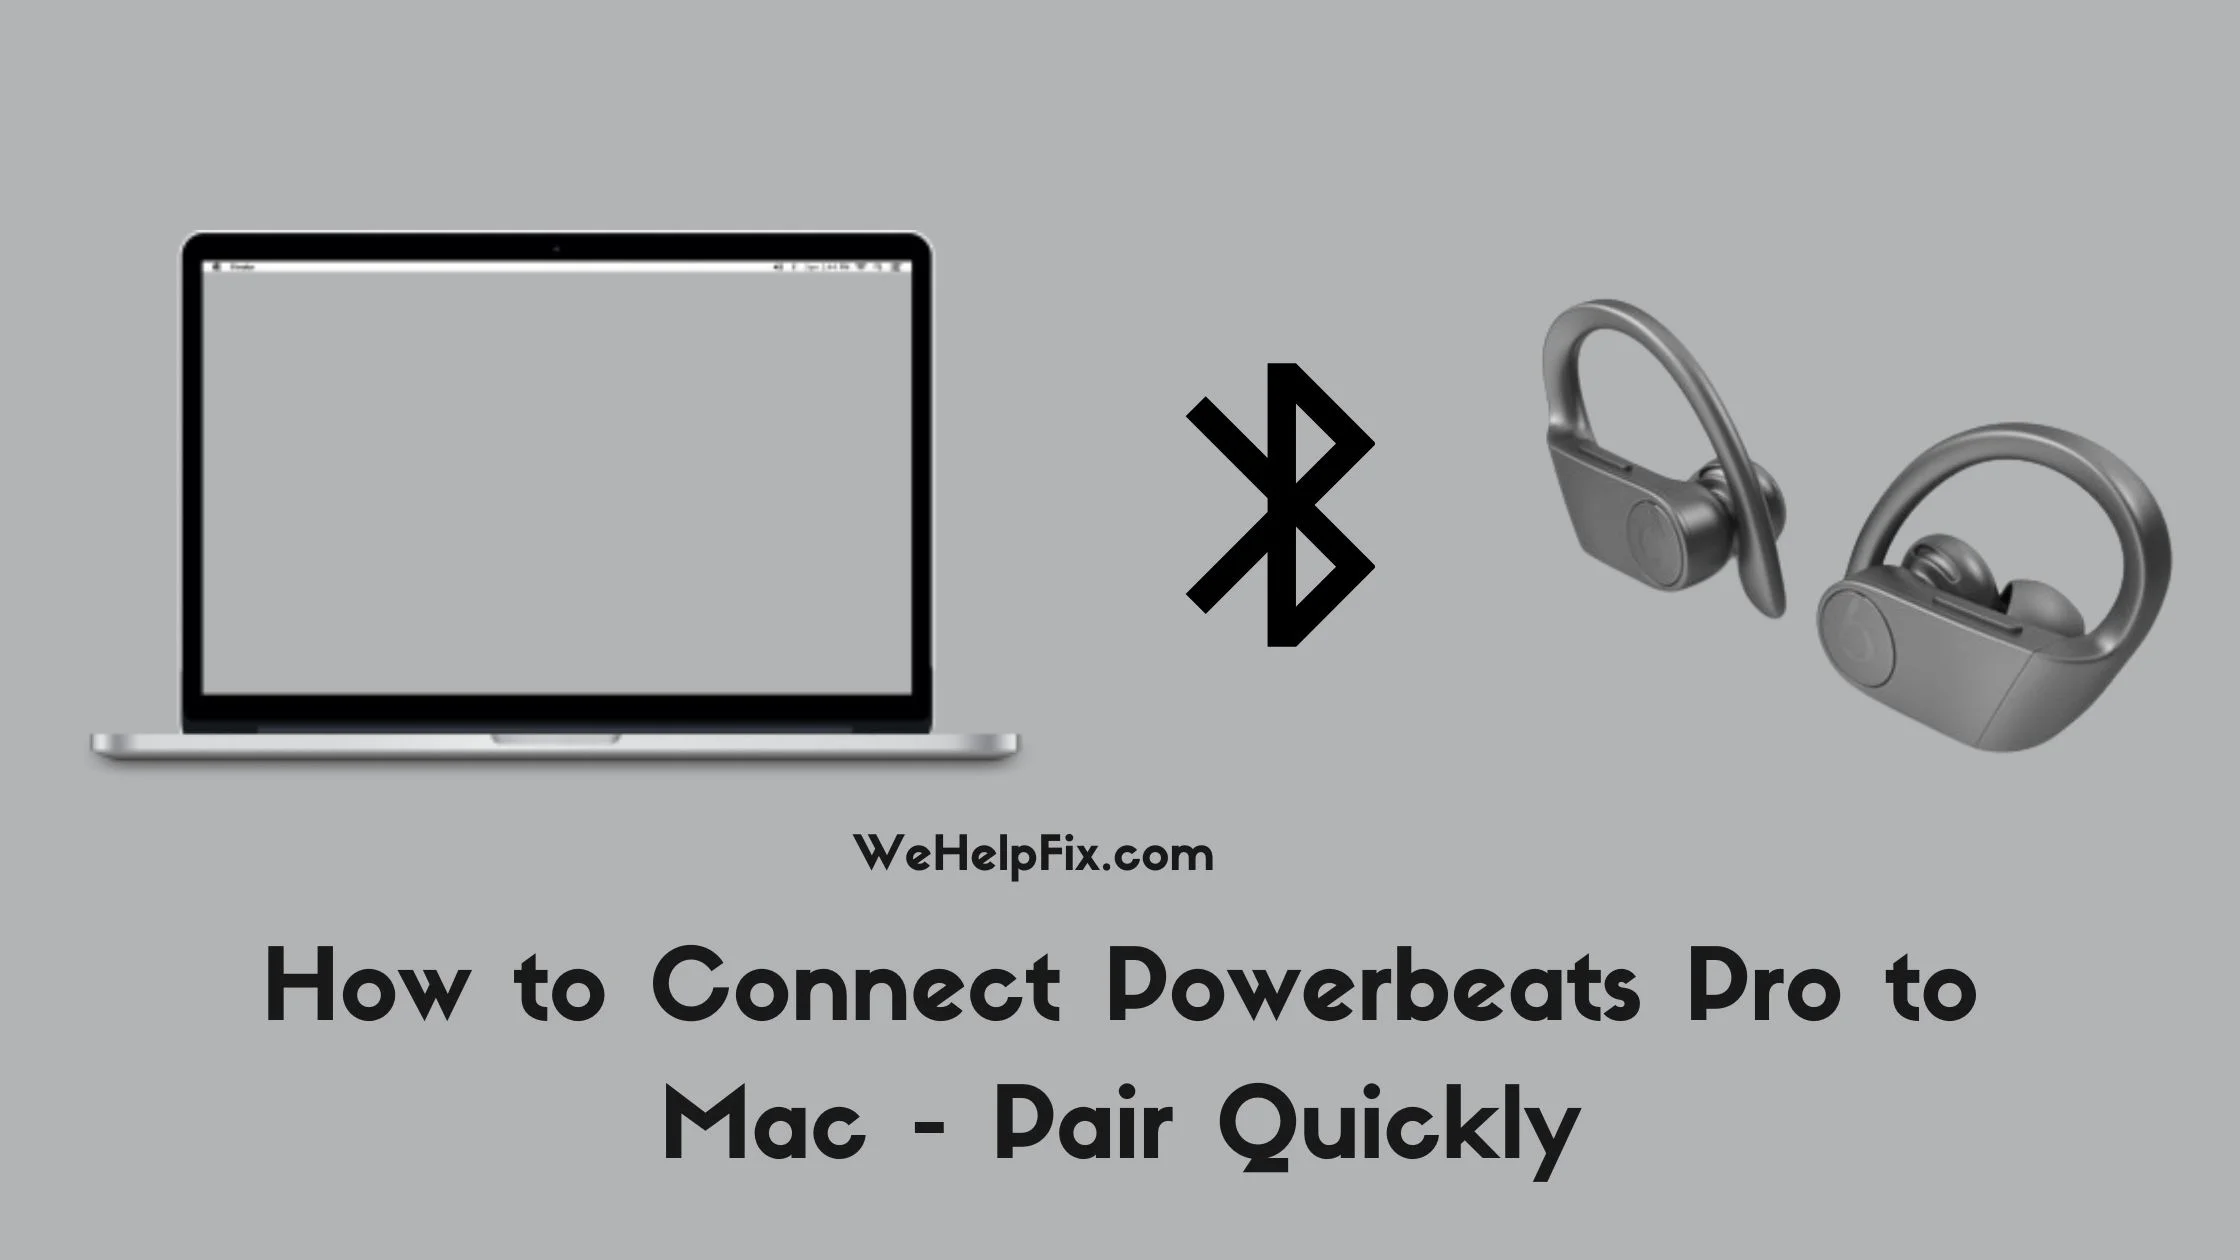 How to Connect Powerbeats Pro to Mac - Pair Quickly